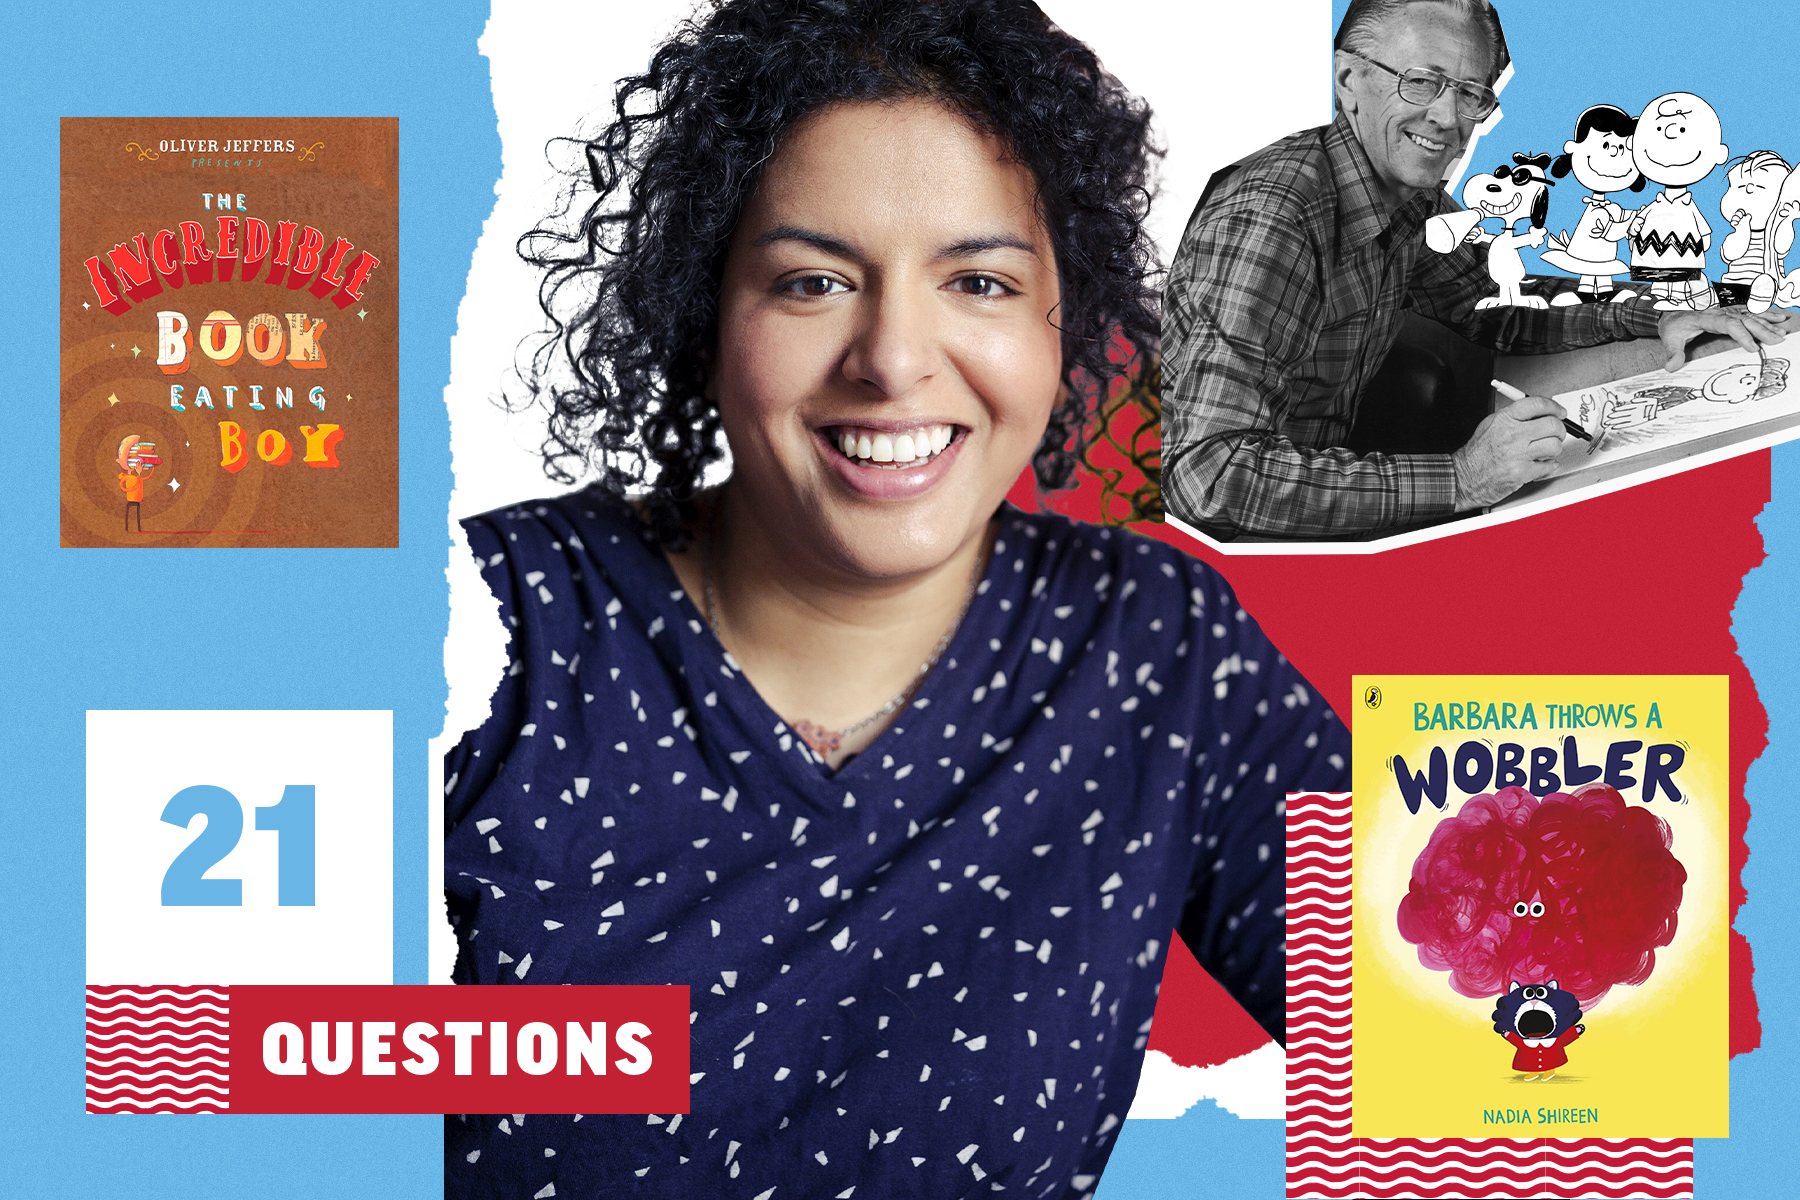 A photo of author and illustrator Nadia Shireen on a blue, red and white background, alongside a picture of Charles Schulz and his Peanut creations as well as Nadia's book Barbara Throws a Wobbler and The Incredible Book Eating Boy by Oliver Jeffers